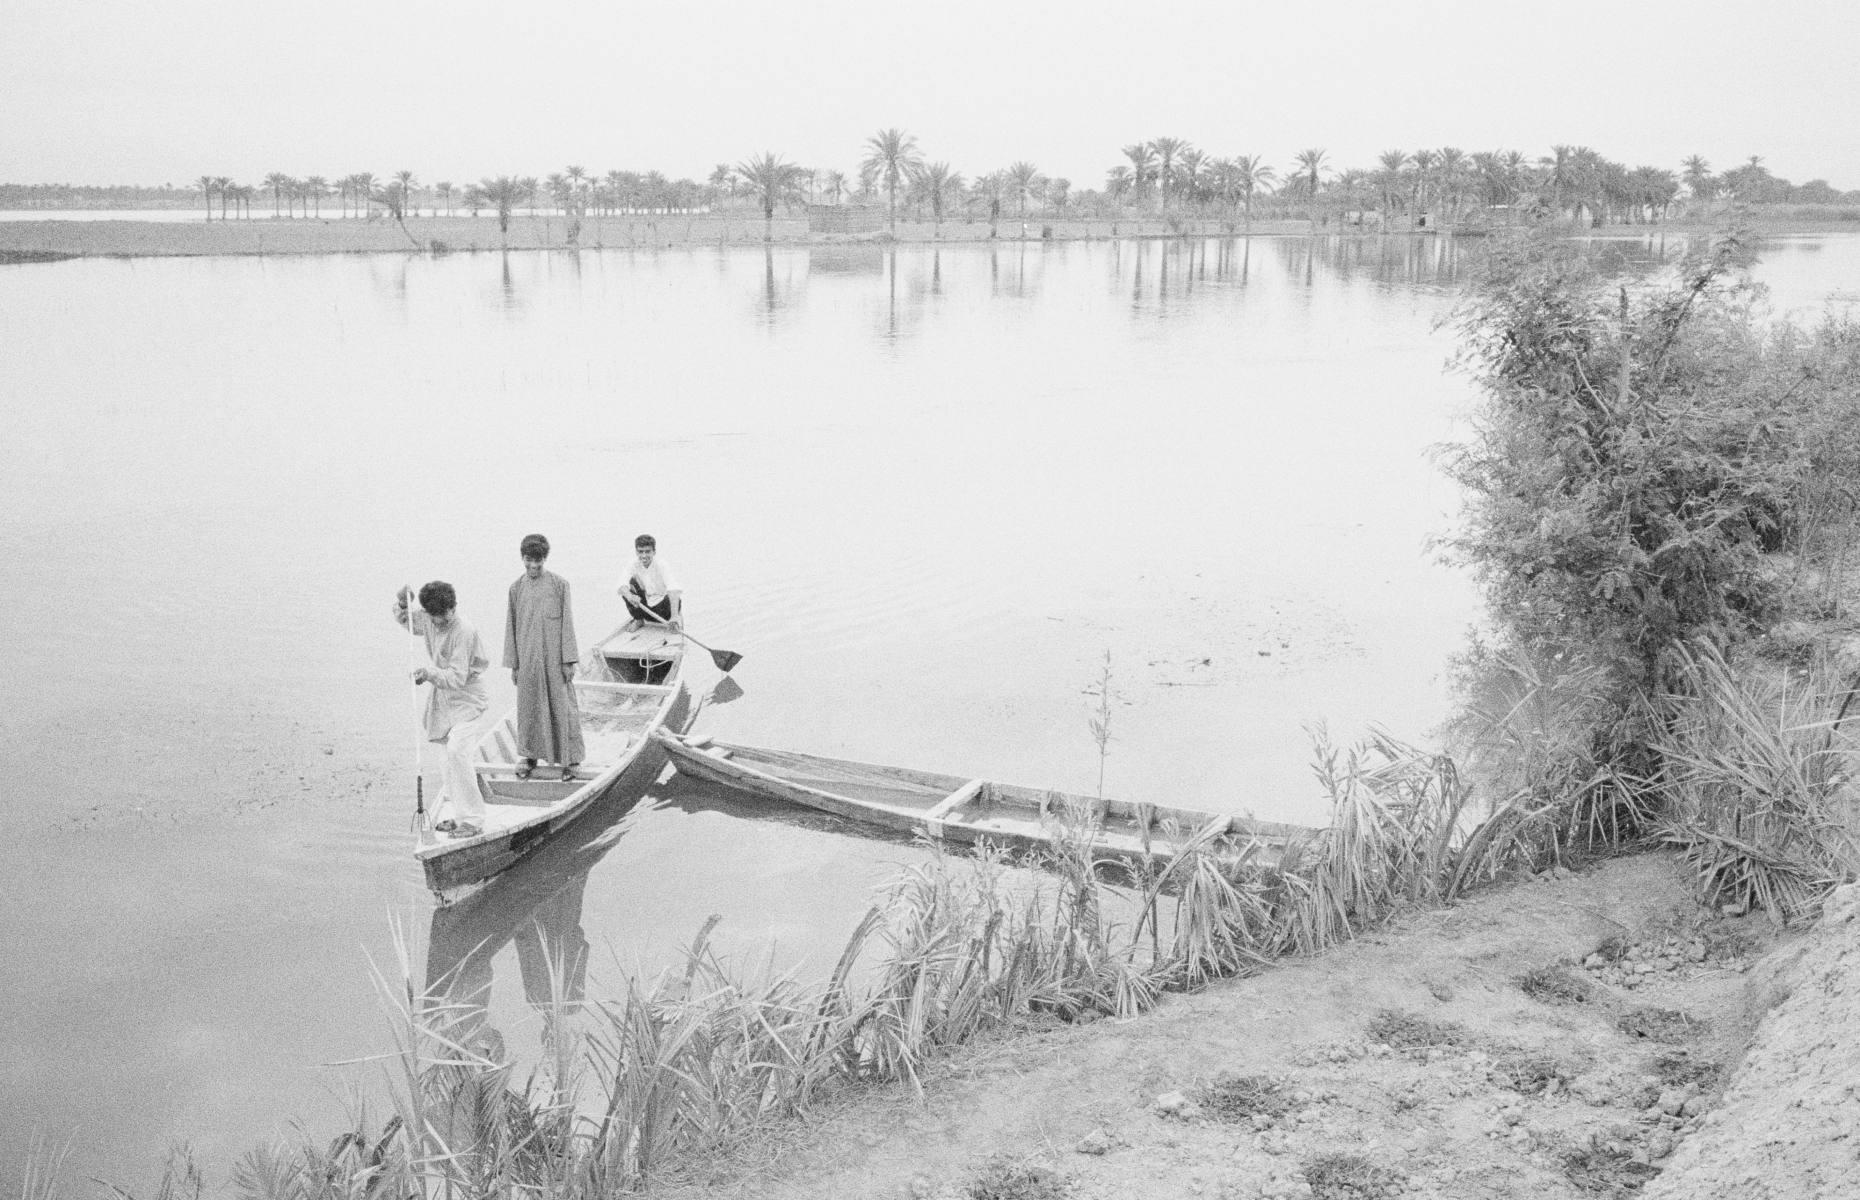 <p>The history of the ancient Tigris is entwined with that of civilisation itself. Along its banks is where humans first developed concepts such as agriculture, writing, beer brewing and the wheel – it is also said to have watered the biblical Garden of Eden. Once belonging to Mesopotamia, the Tigris River now predominantly courses through modern-day Iraq, including the cities of Mosul and Baghdad. It empties into the Persian Gulf together with its twin river, the Euphrates. This image of boys boating on the Tigris dates back to 1995.</p>